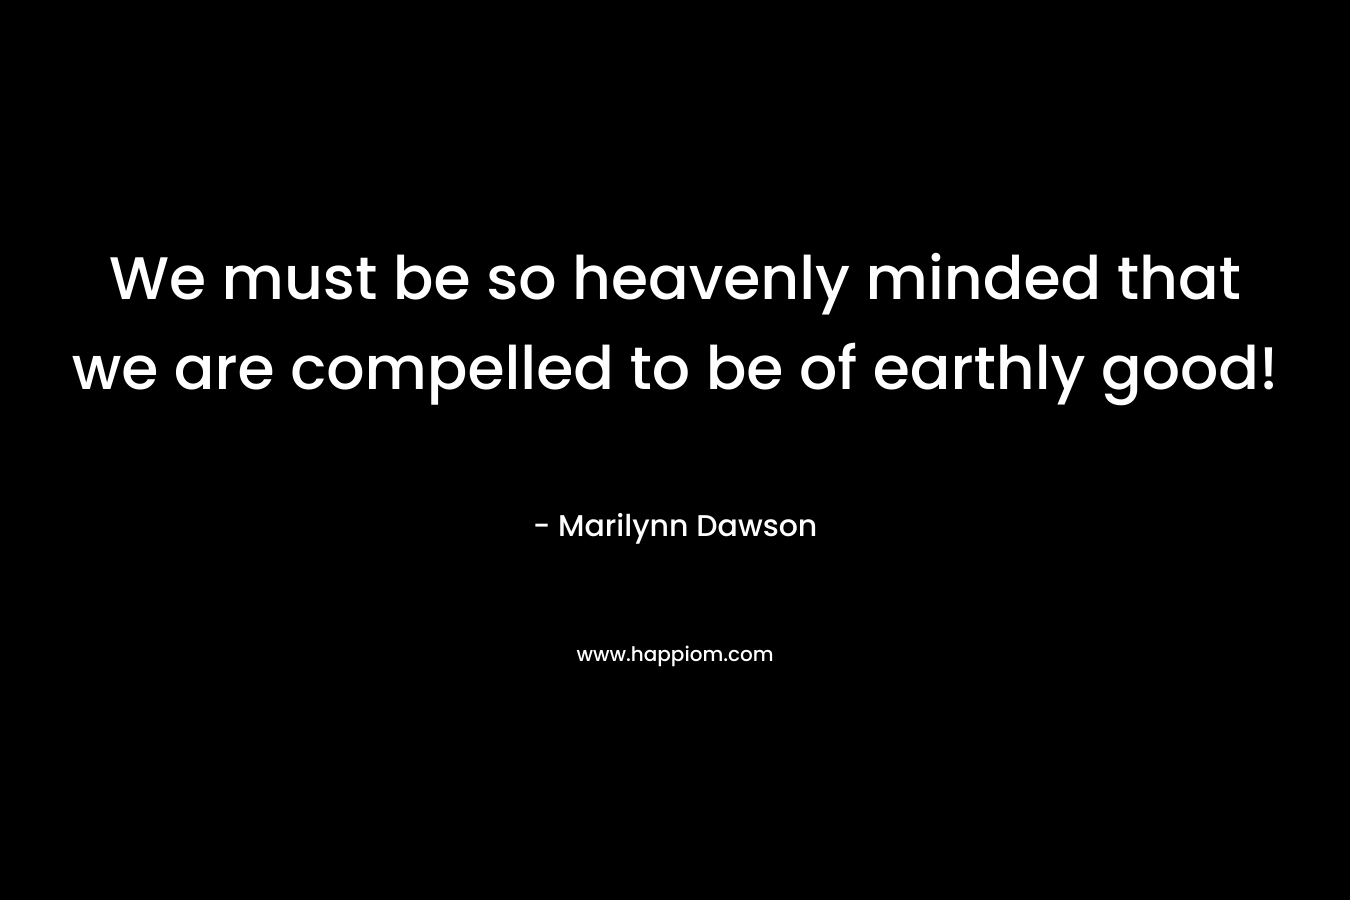 We must be so heavenly minded that we are compelled to be of earthly good! – Marilynn Dawson